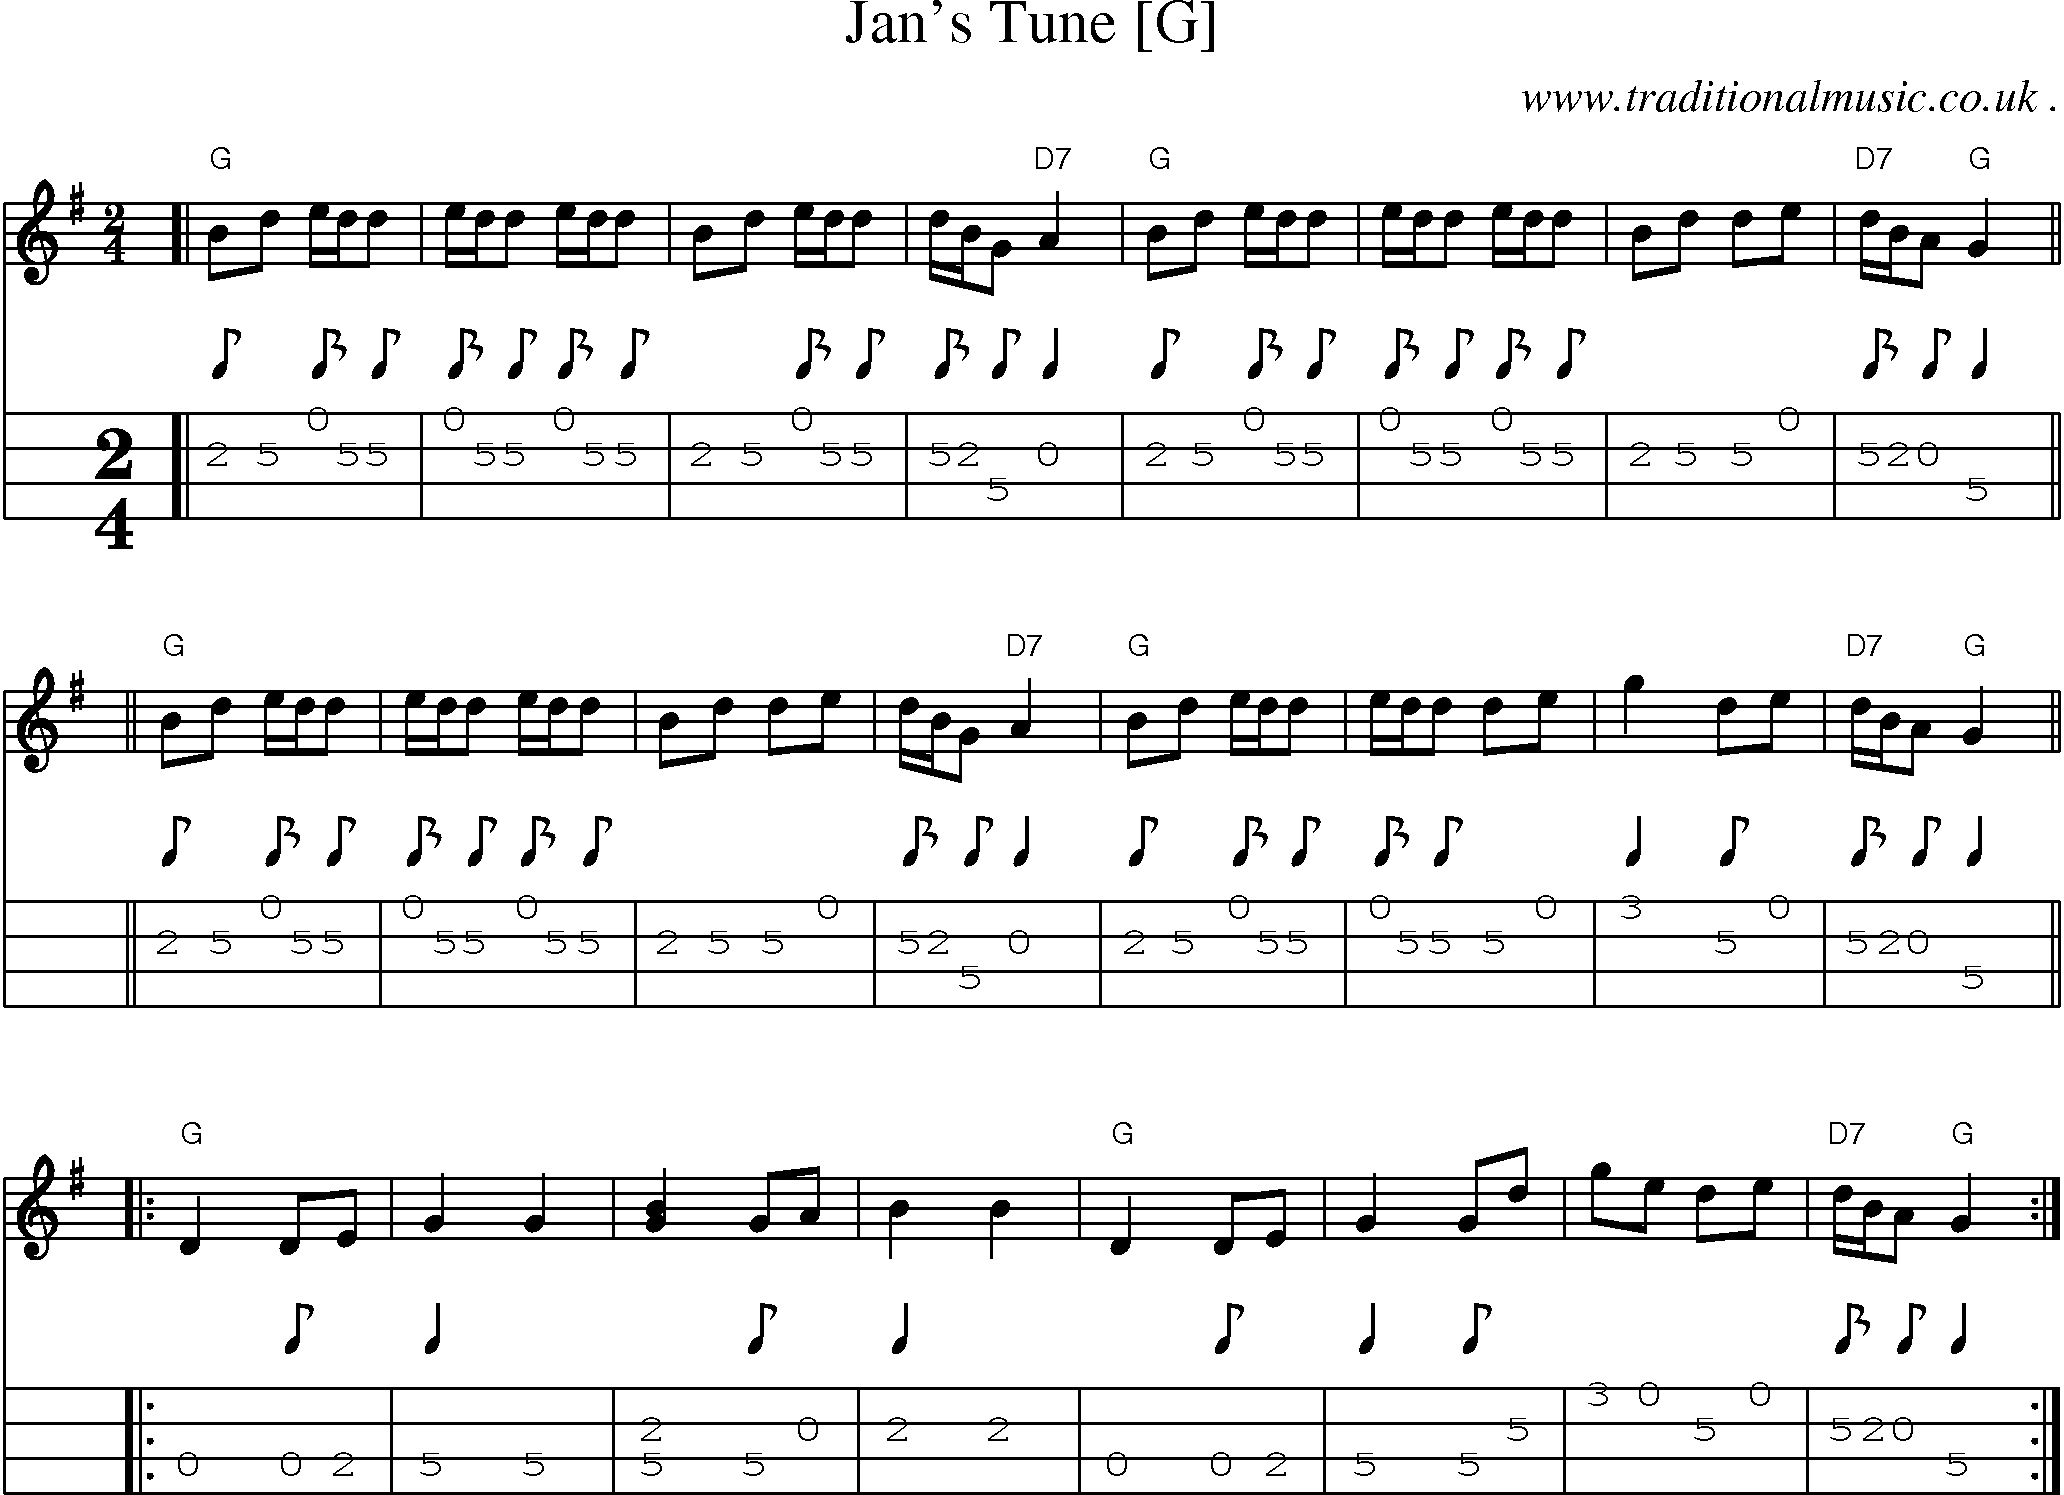 Music Score and Mandolin Tabs for Jans Tune [g]